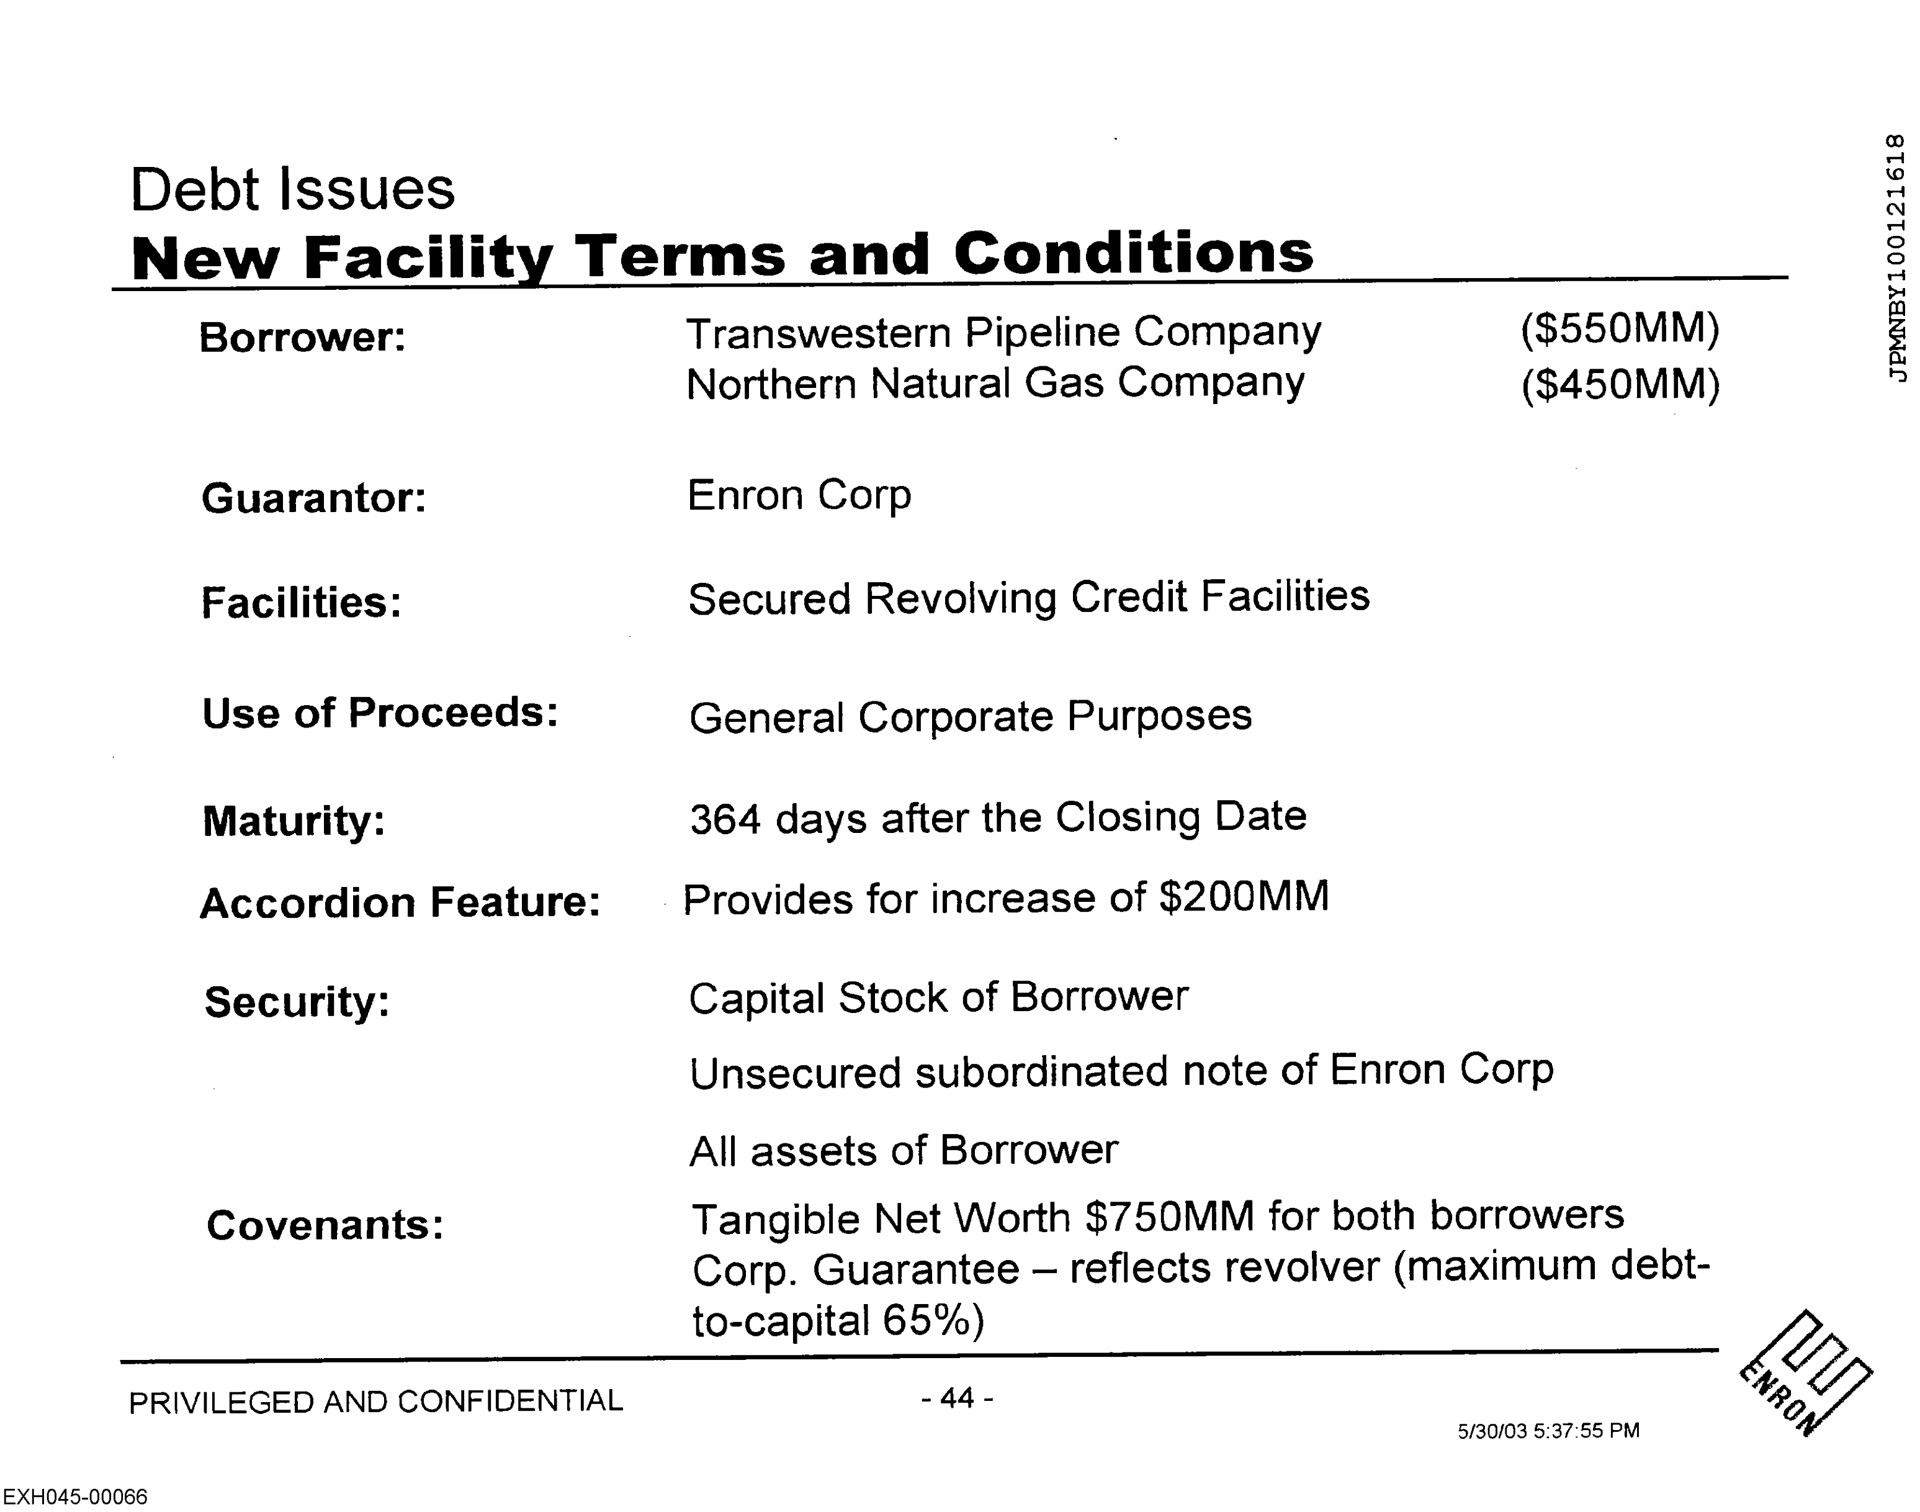 debt issues new facility terms and conditions northern natural gas company use of proceeds general corporate purposes | Enron